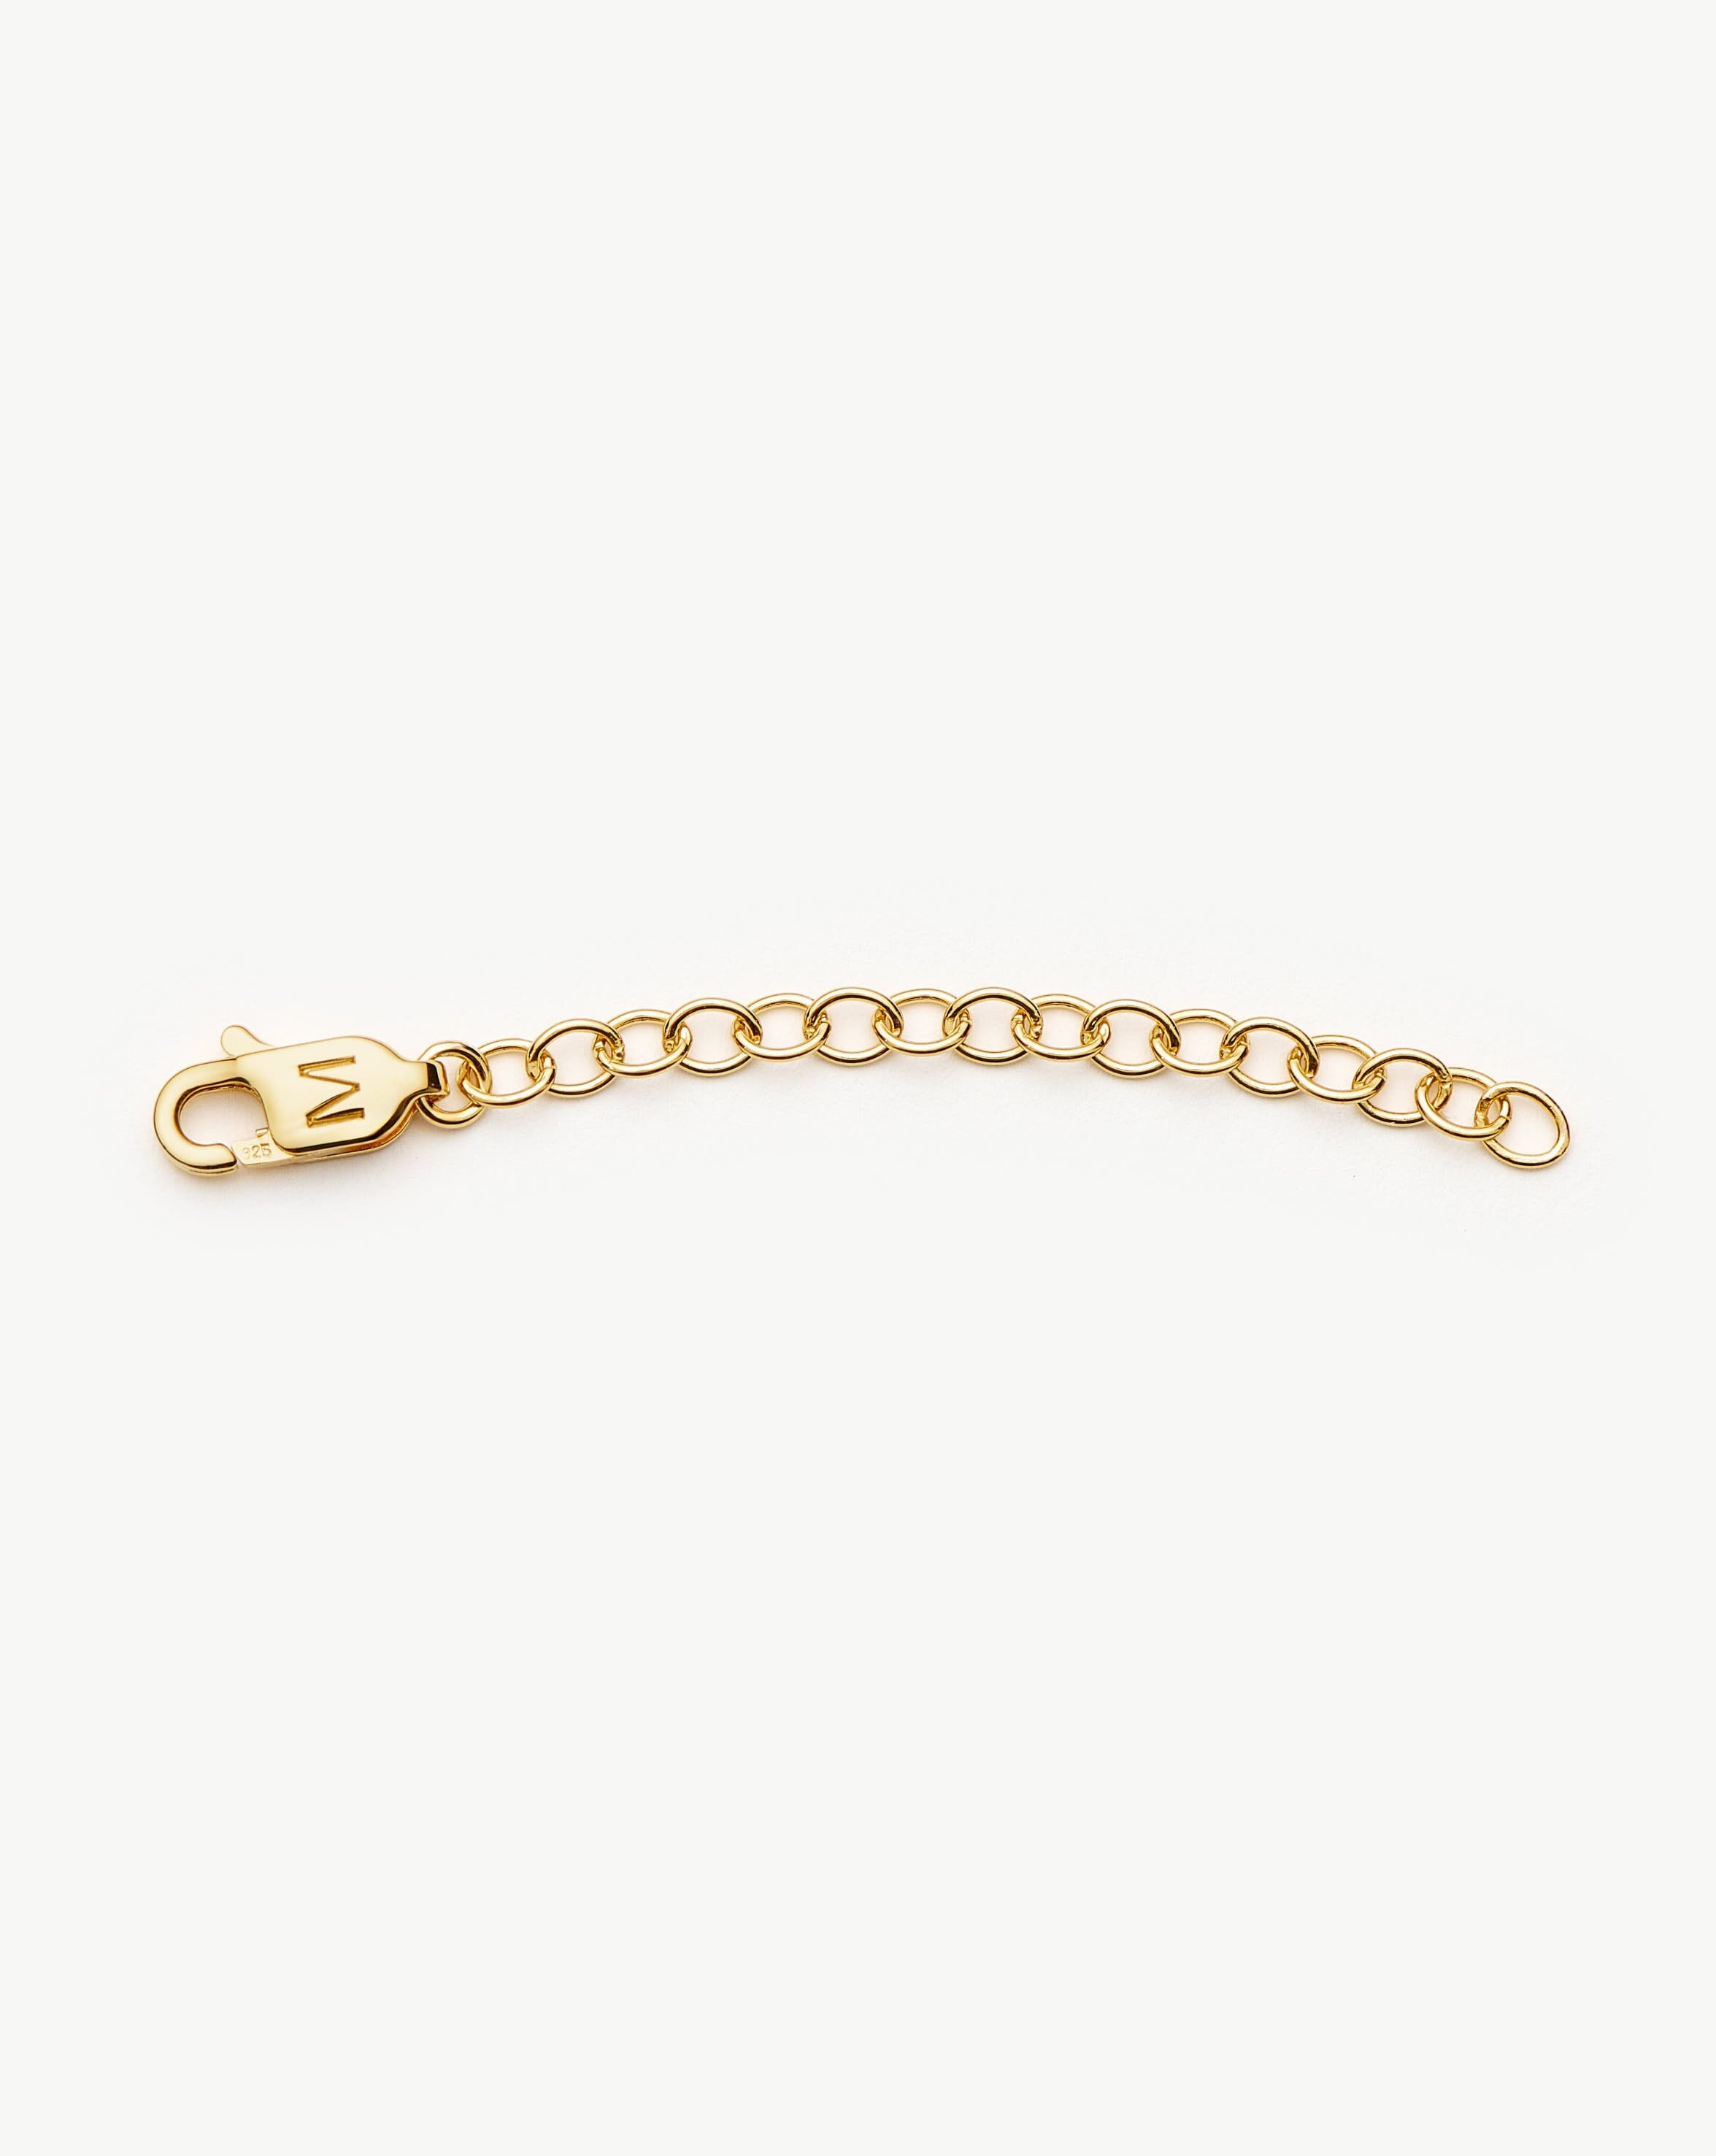 Adjustable Chain Necklace Extender | 18ct Recycled Gold Vermeil Extender Missoma 